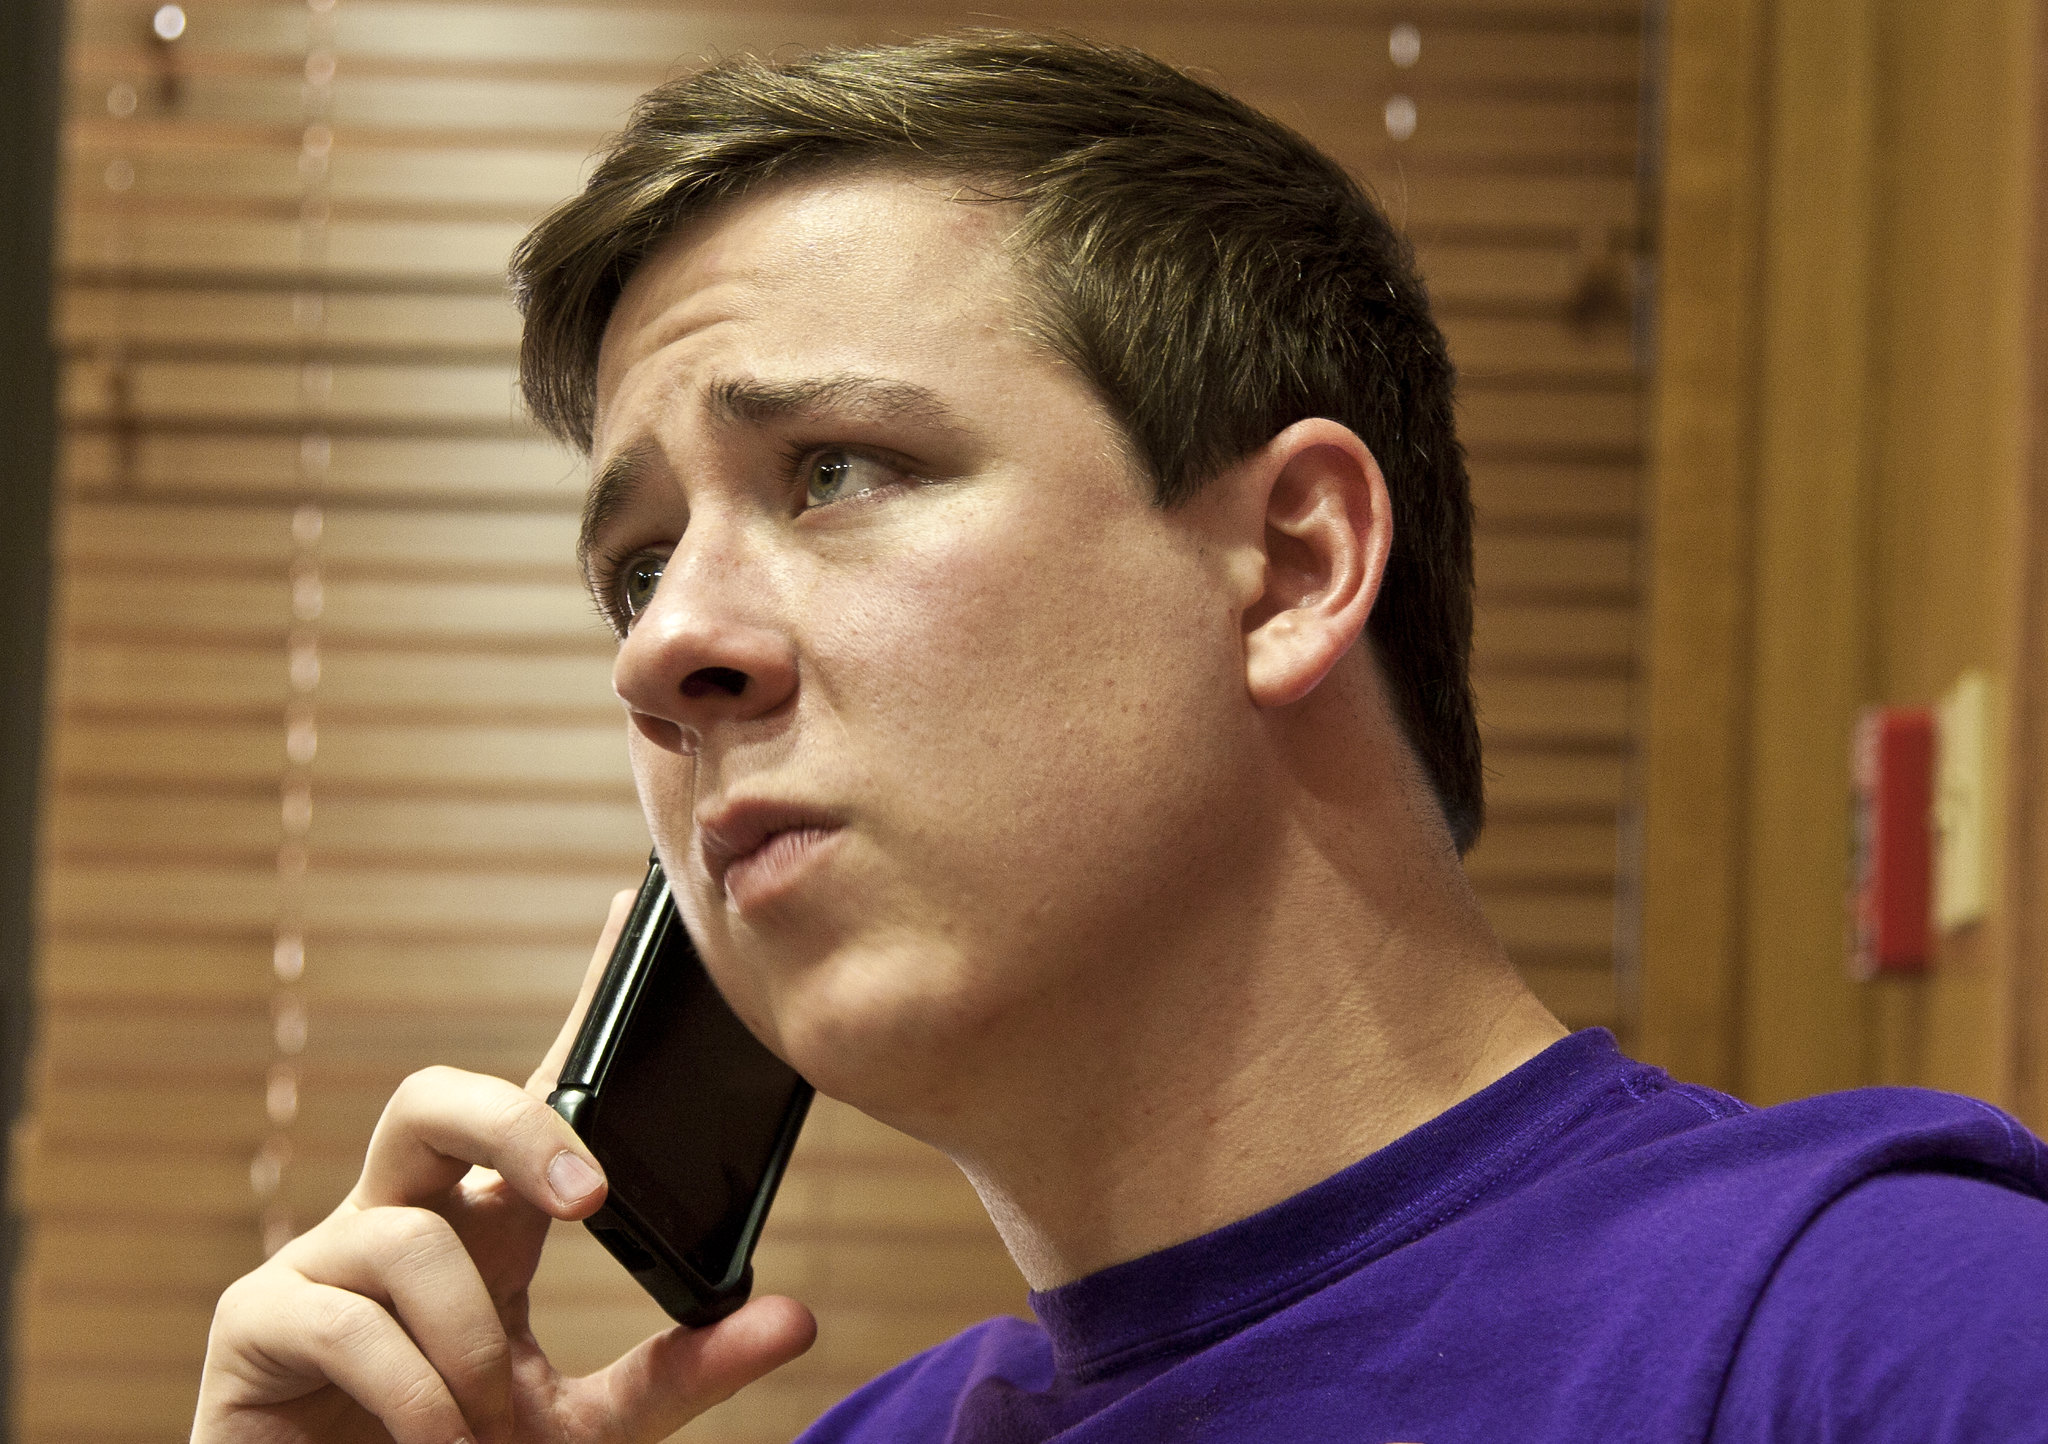 An upset and remorseful man talking to someone on the phone | Source: Flickr